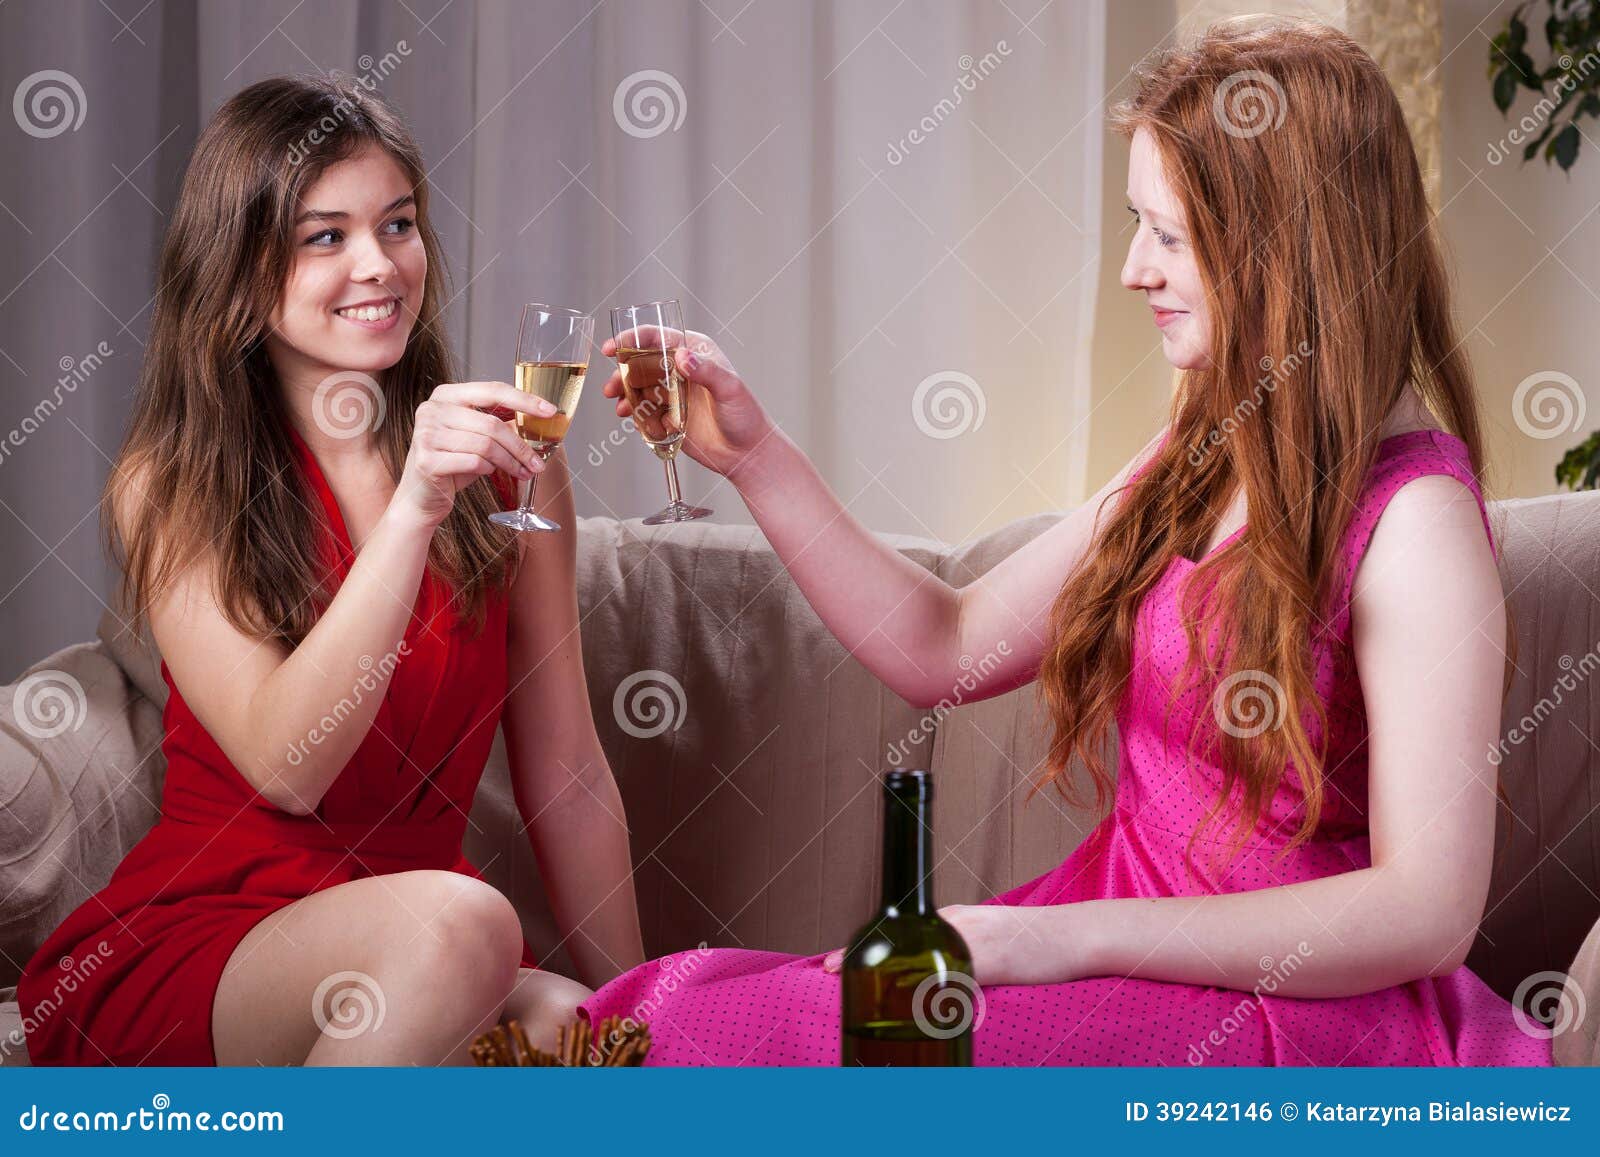 girls celebrating an occasion